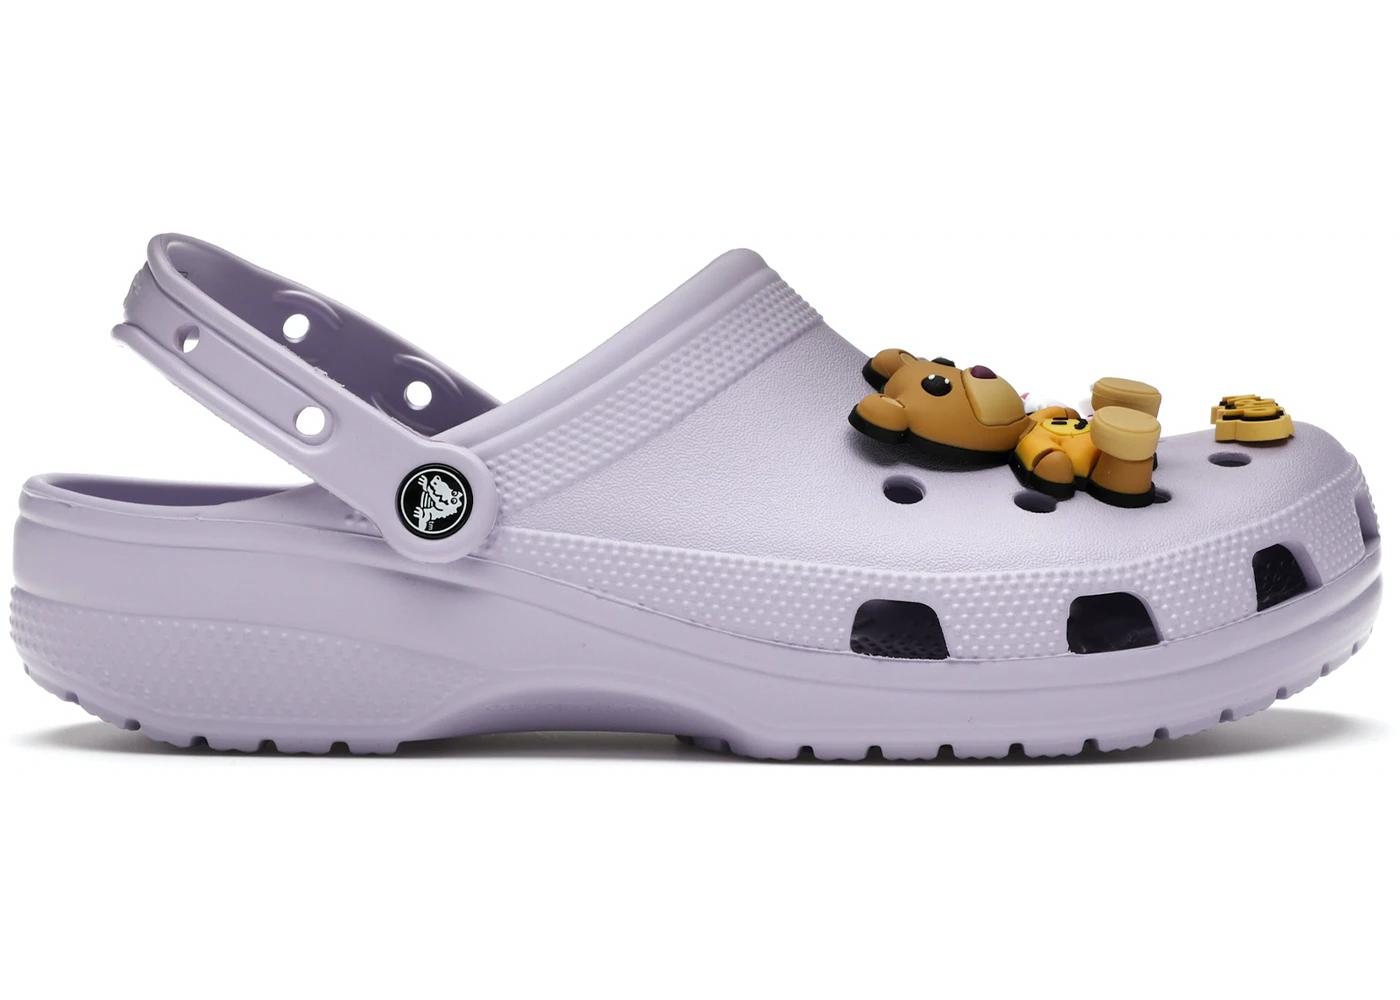 Classic Clog Justin Bieber with drew house 2 Lavender by CROCS